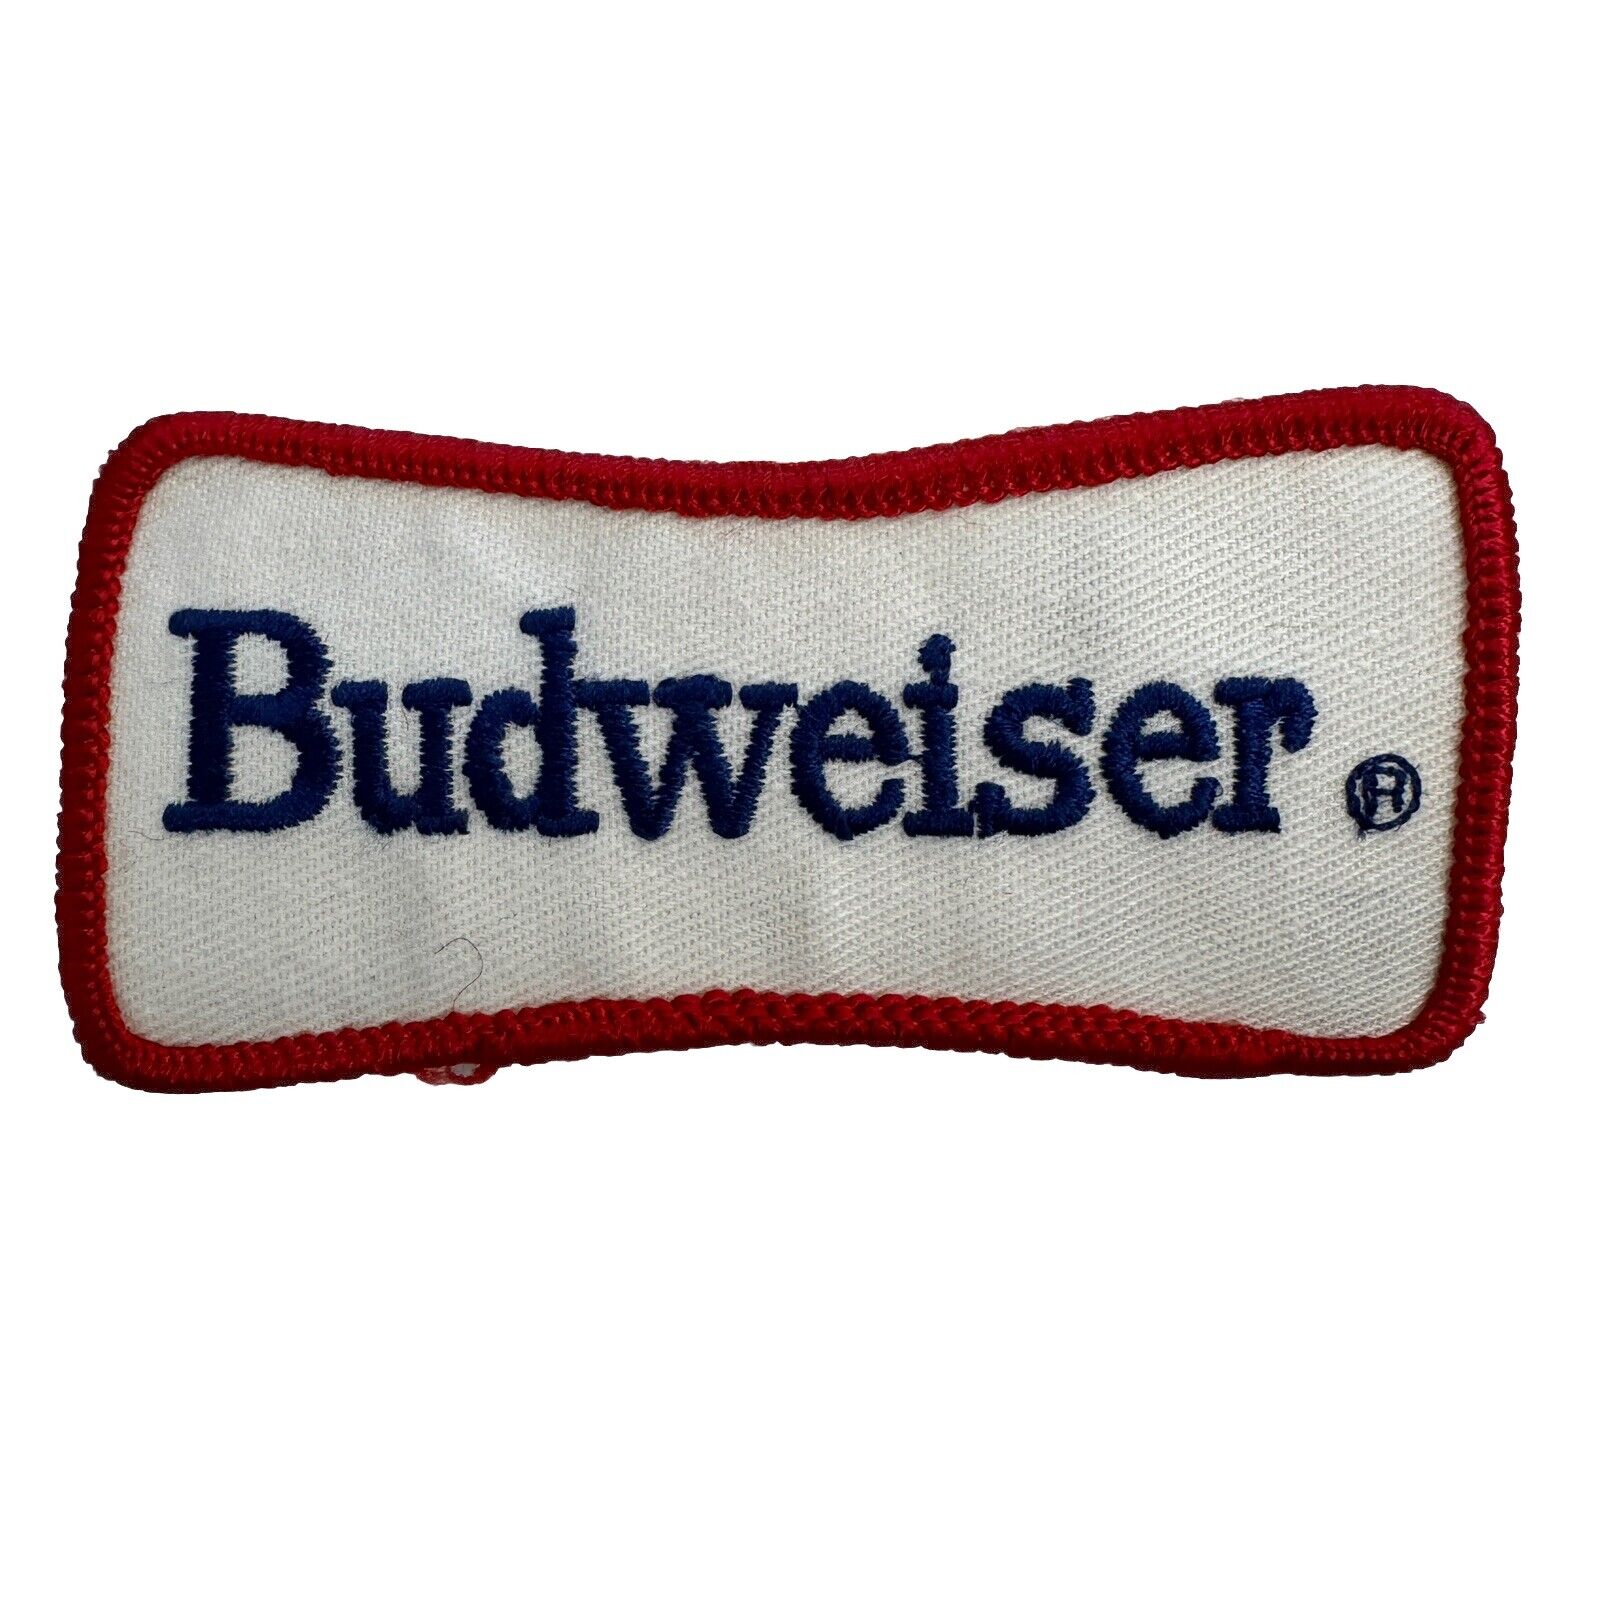 Vintage Budweiser Sew On Iron On Patch Work Patch RARE Red White Blue